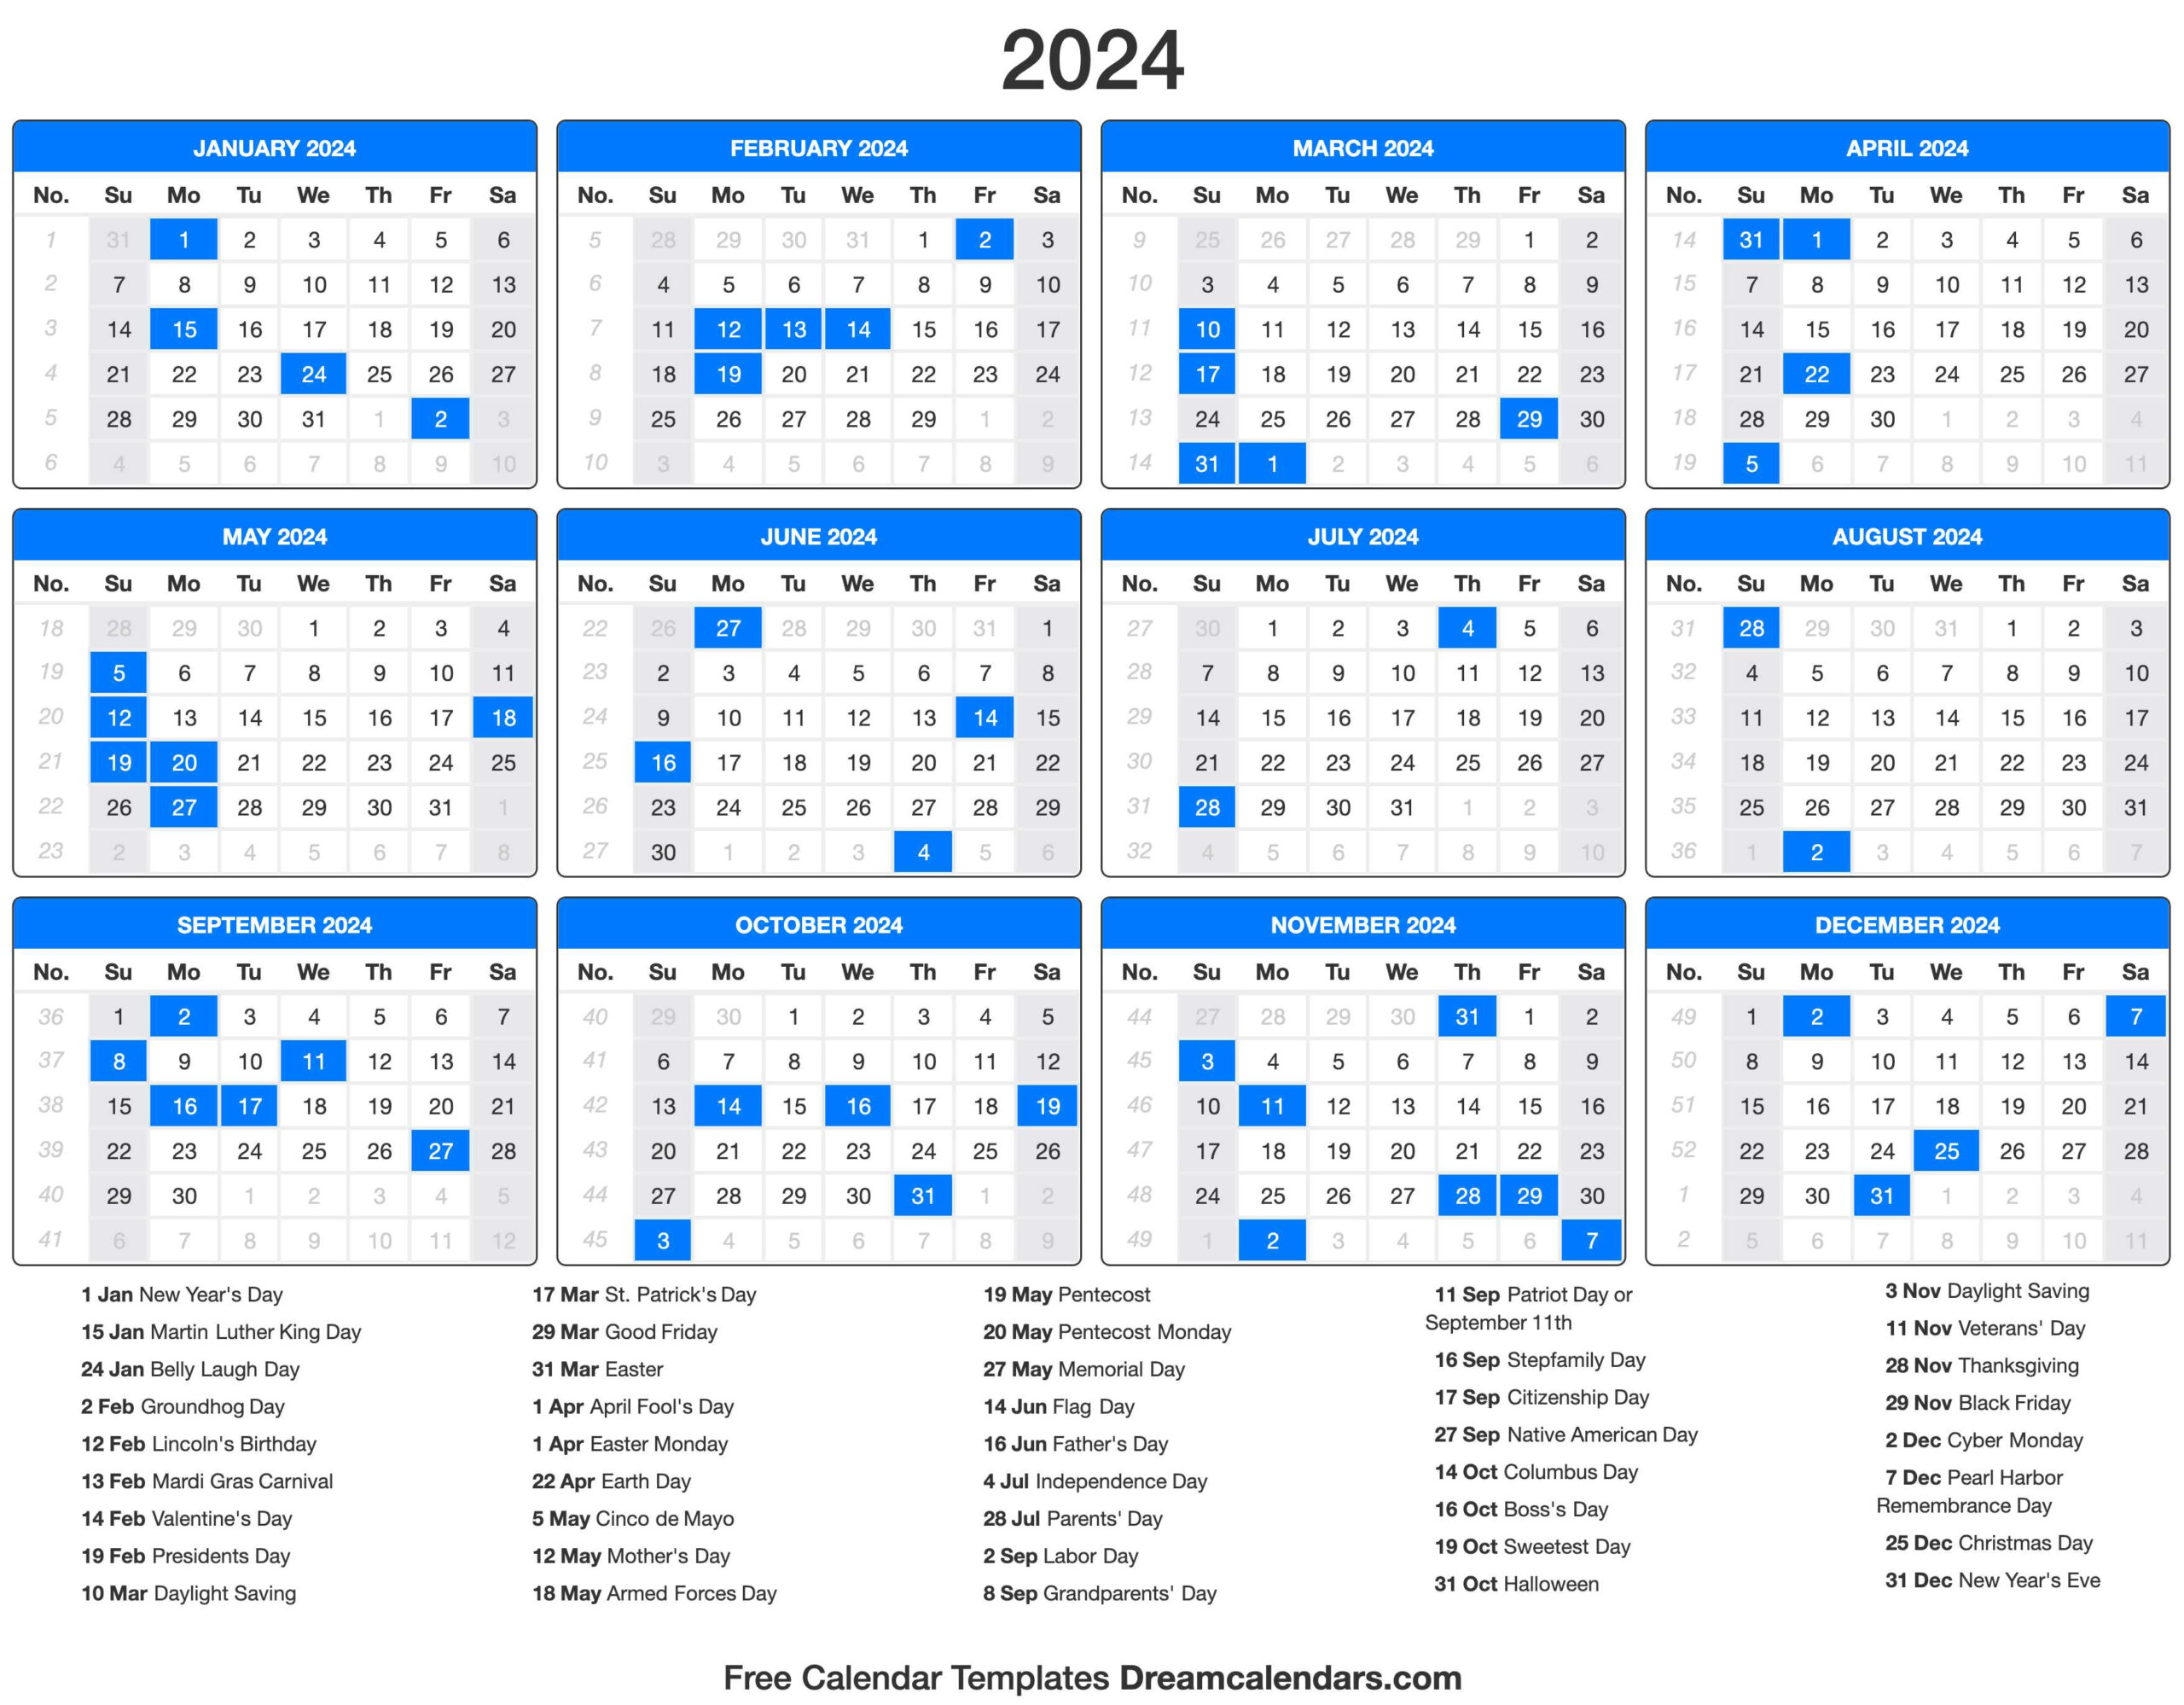 2024 Calendar for Printable 2024 Calendar With Holidays And Moon Phases